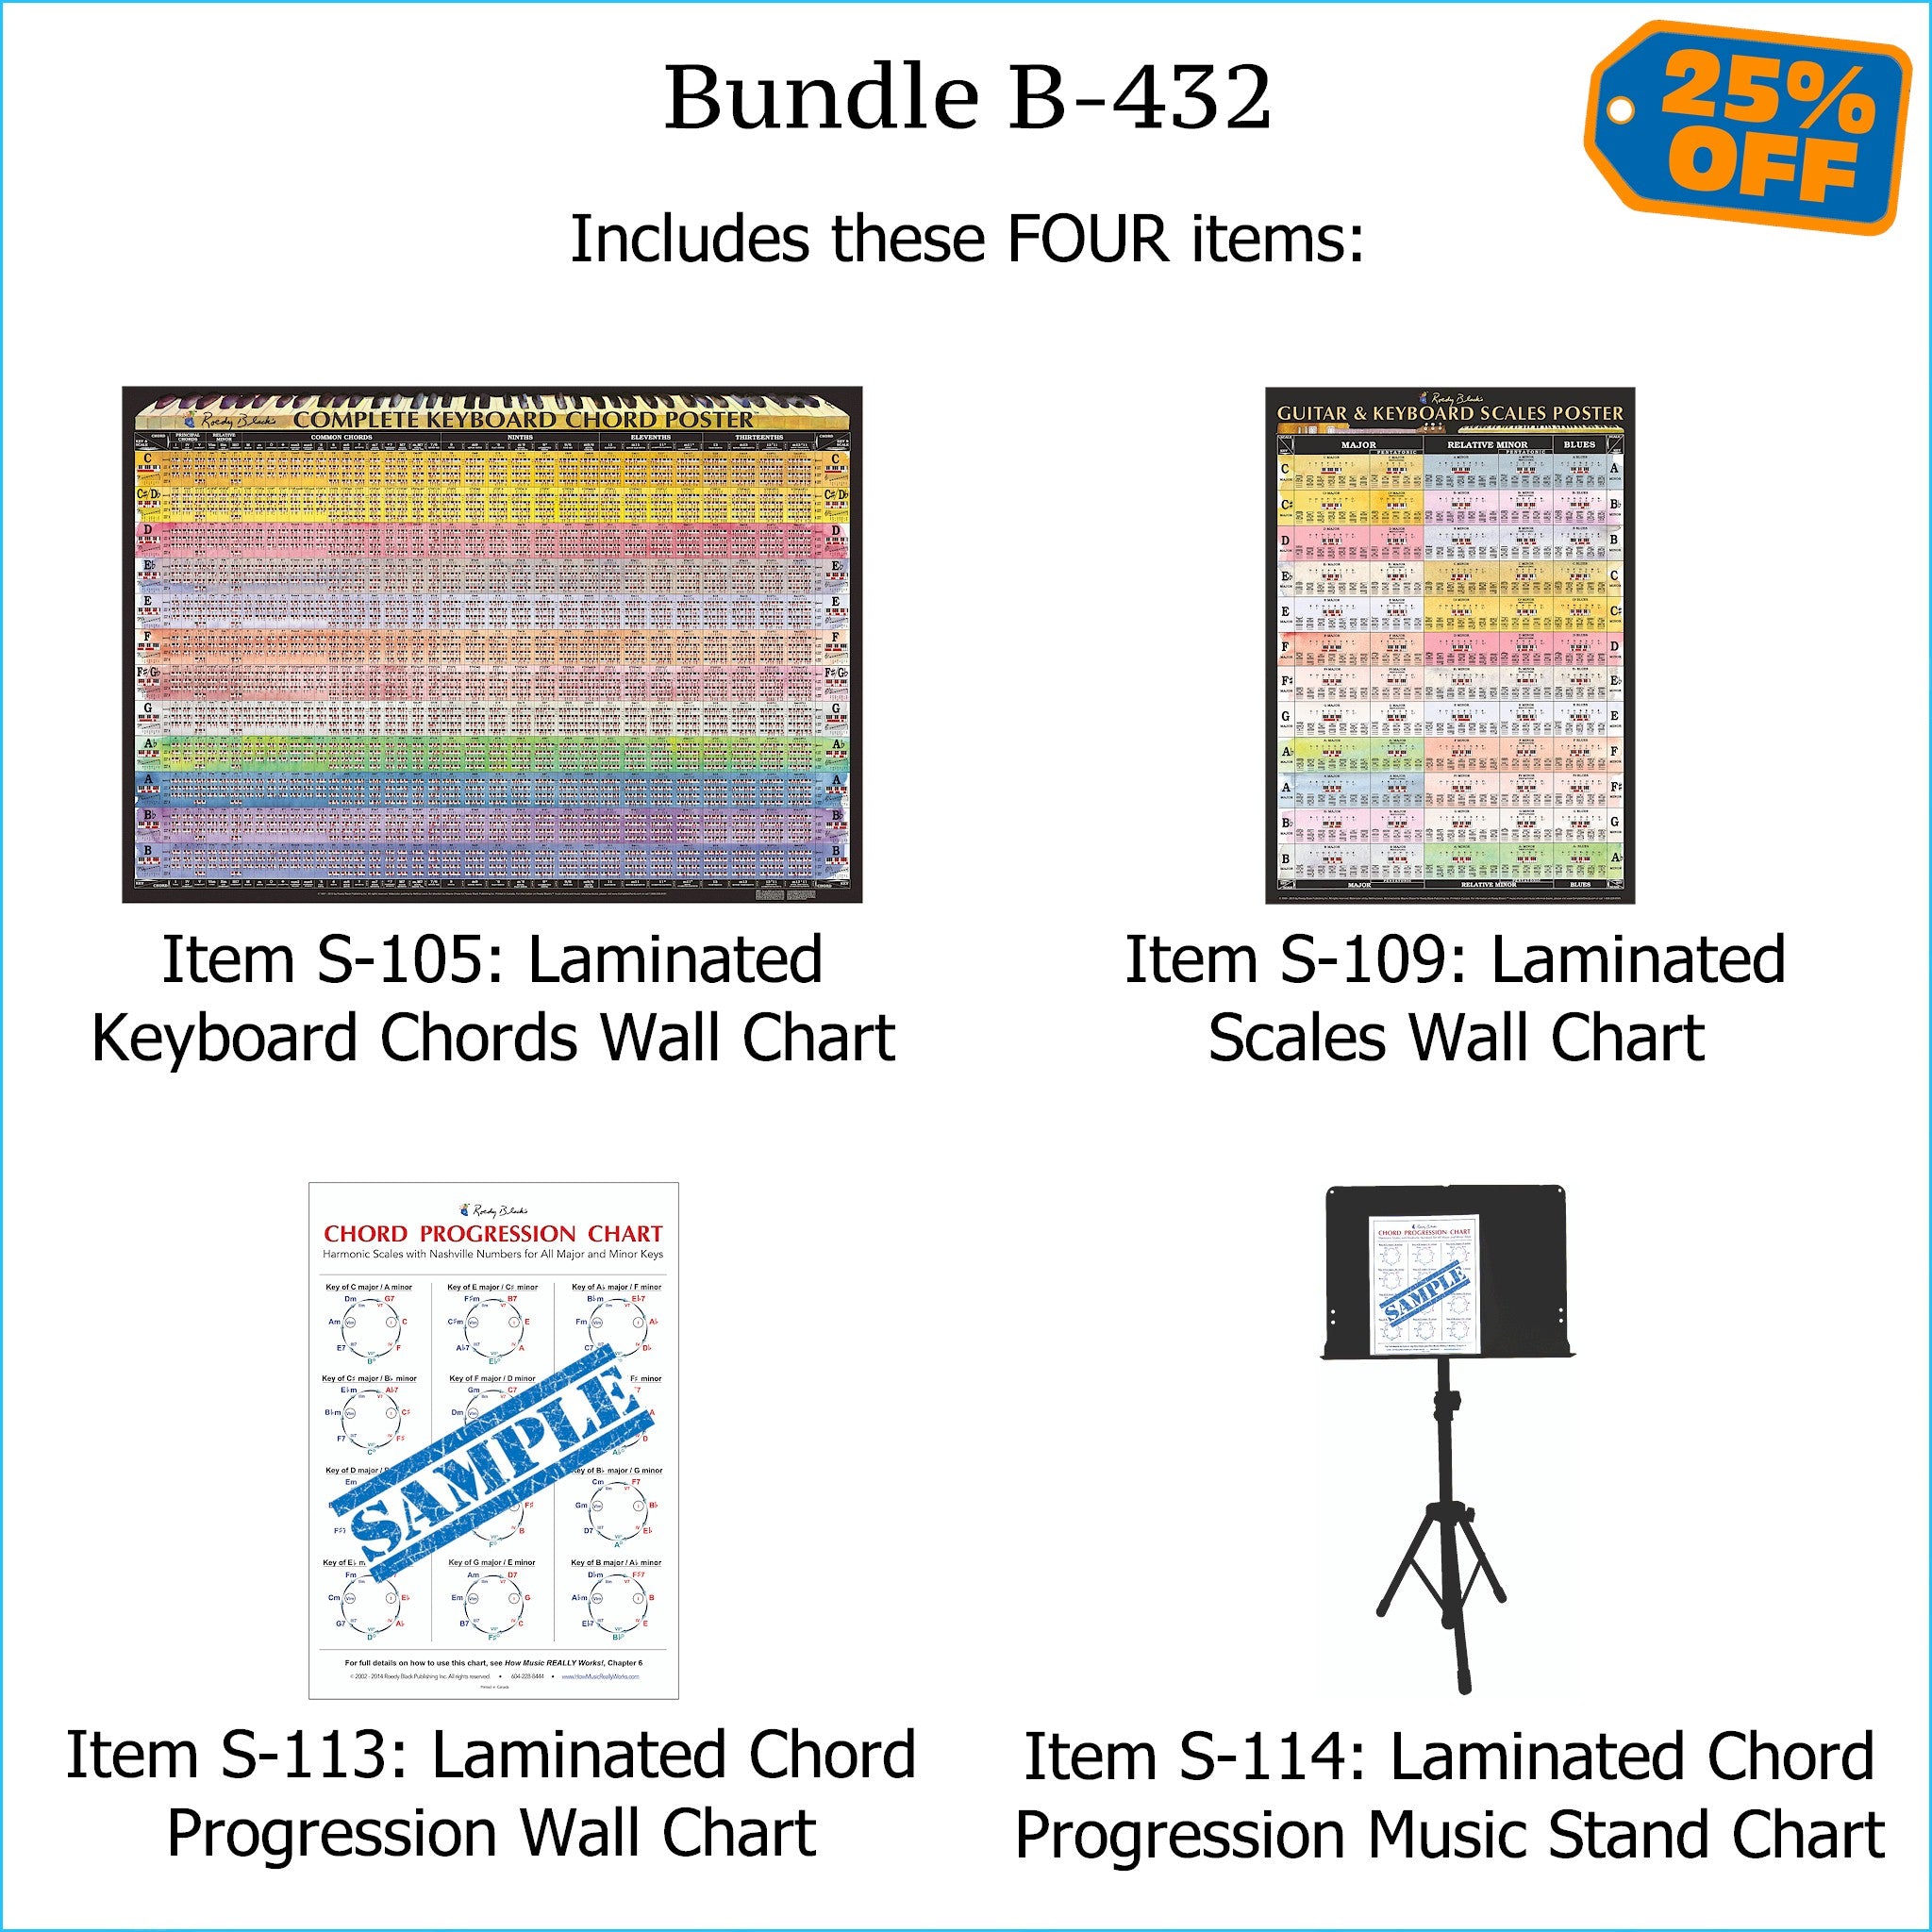 Bundle B-432: THREE Laminated Wall Posters: Complete Keyboard Chords, Scales, & Chord Progressions. FREE SHIPPING – USA & Canada.